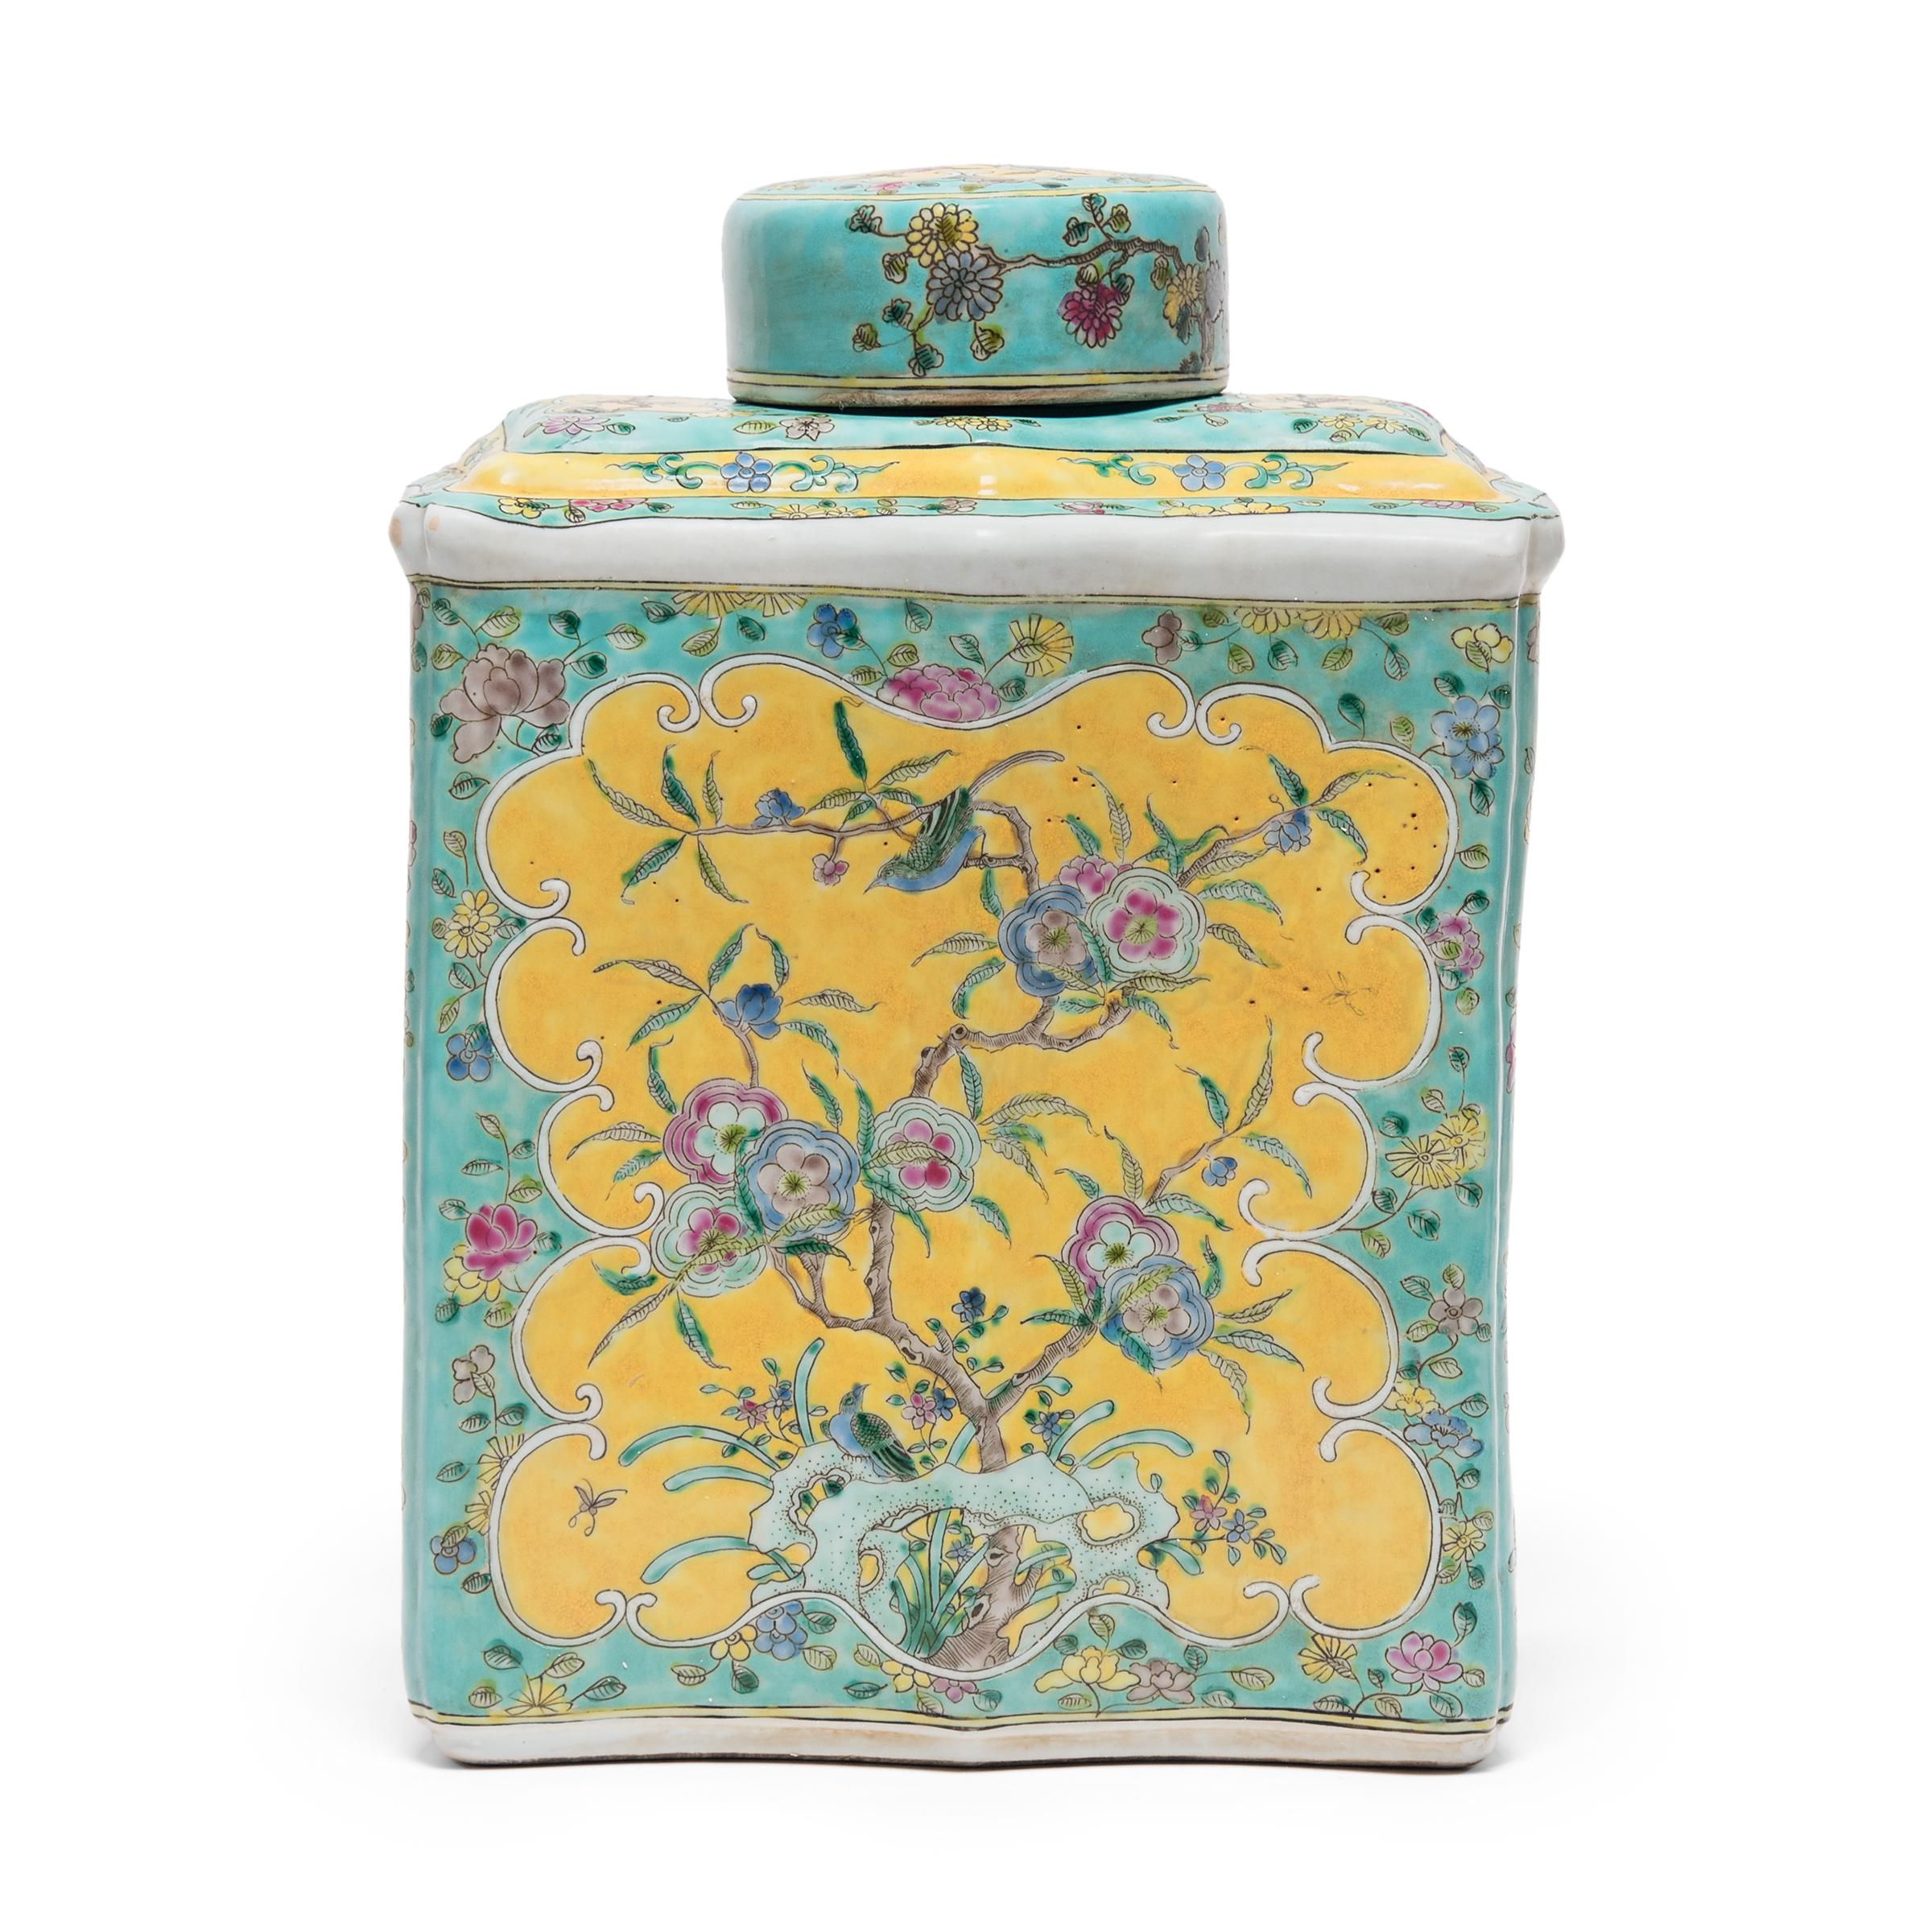 Enameled Chinese Yellow and Turquoise Famille Rose Tea Leaf Jar